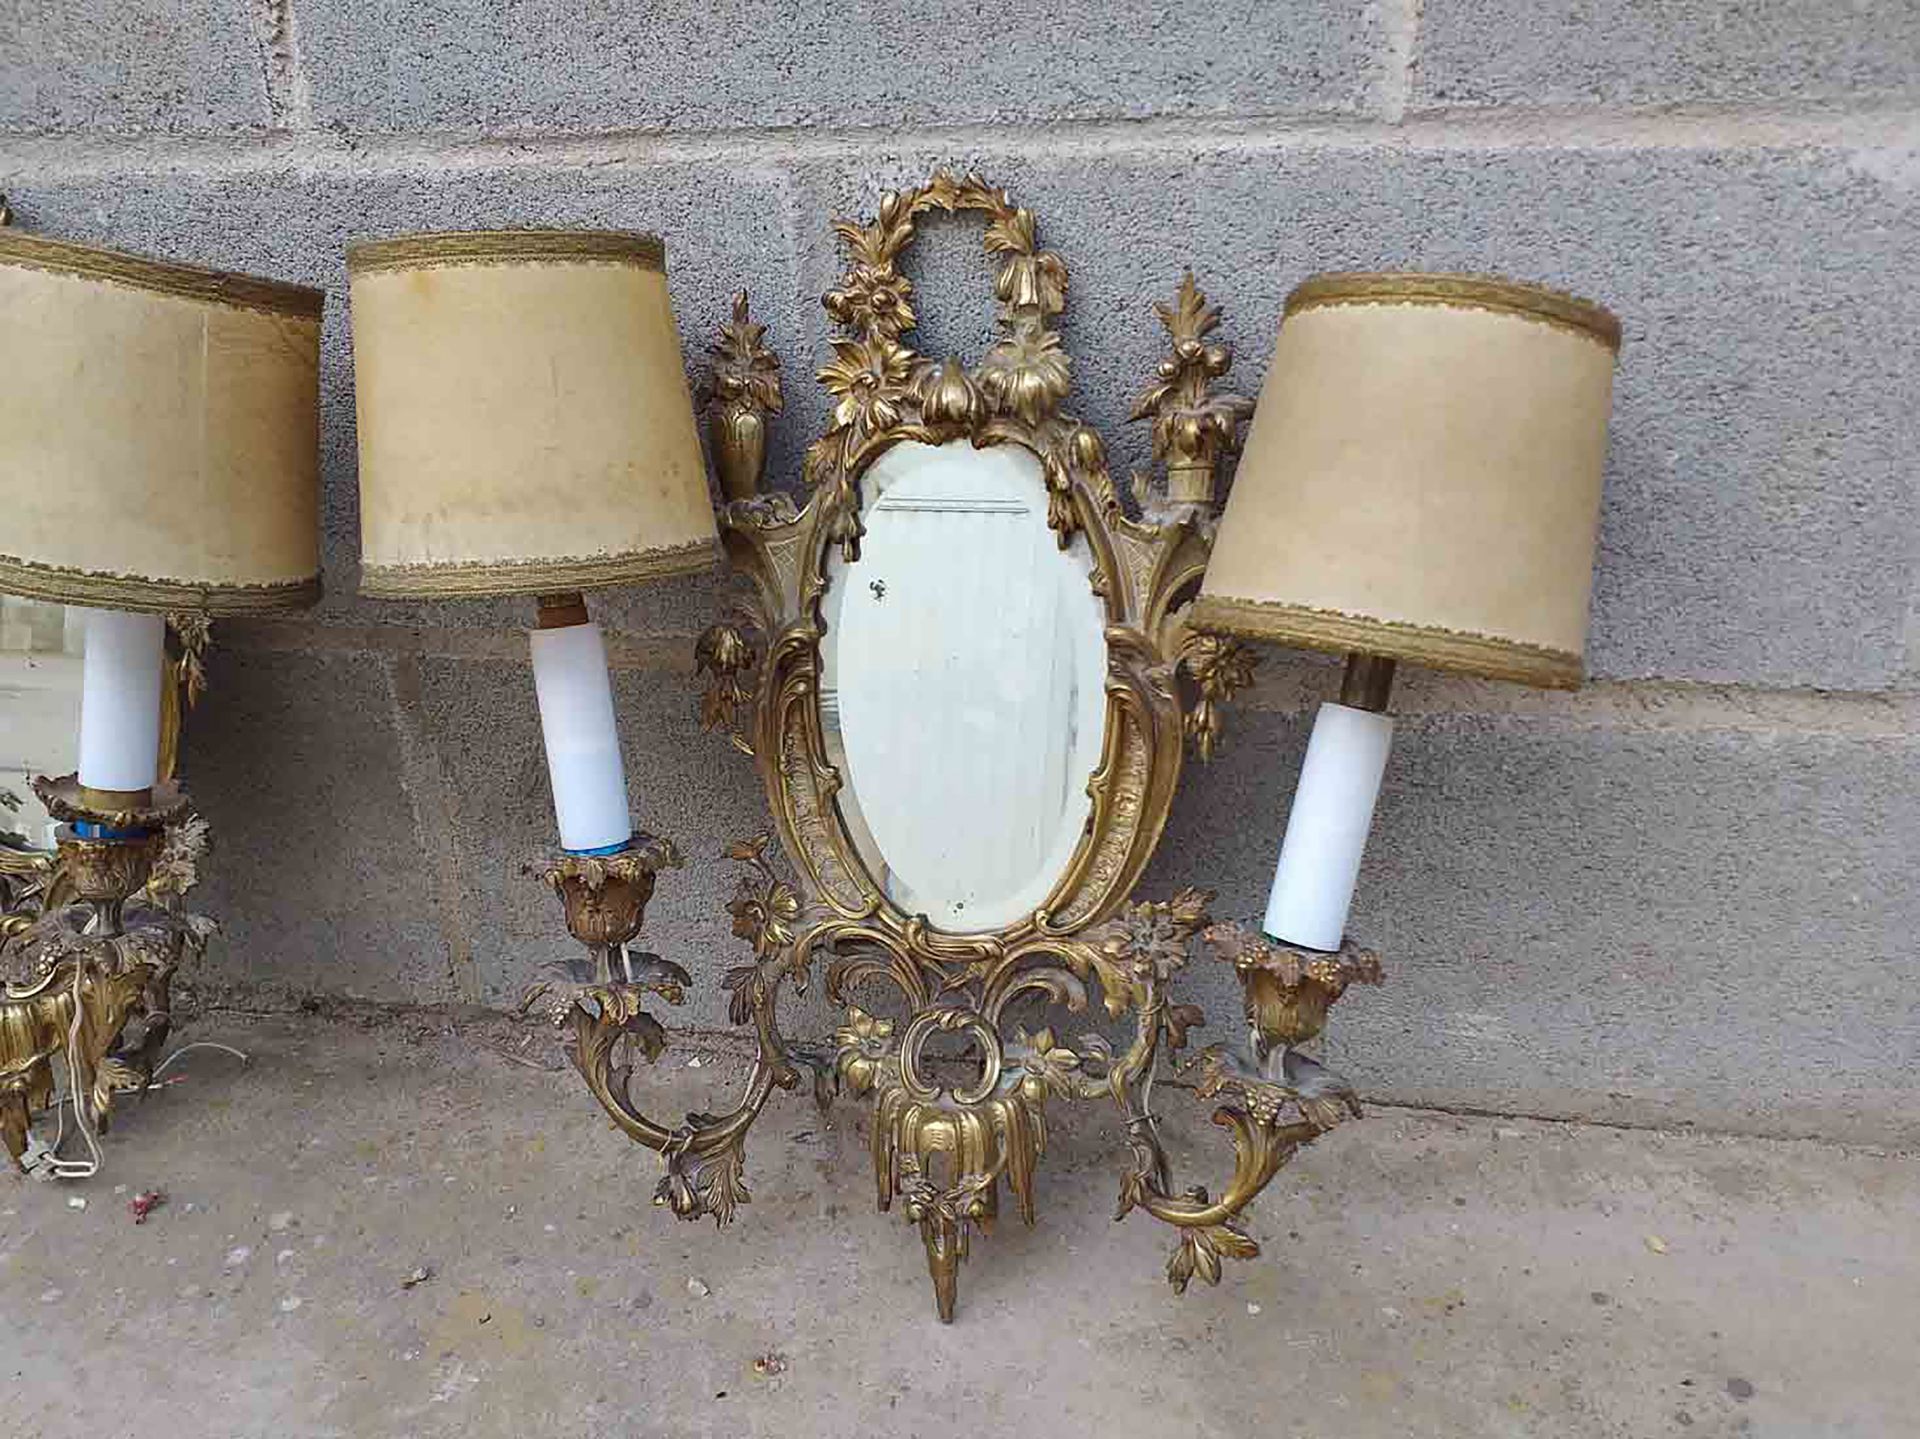 Pair of elegant lamps in the form of French Louis XV style wall sconces in gilt bronze, 19th century - Image 2 of 2